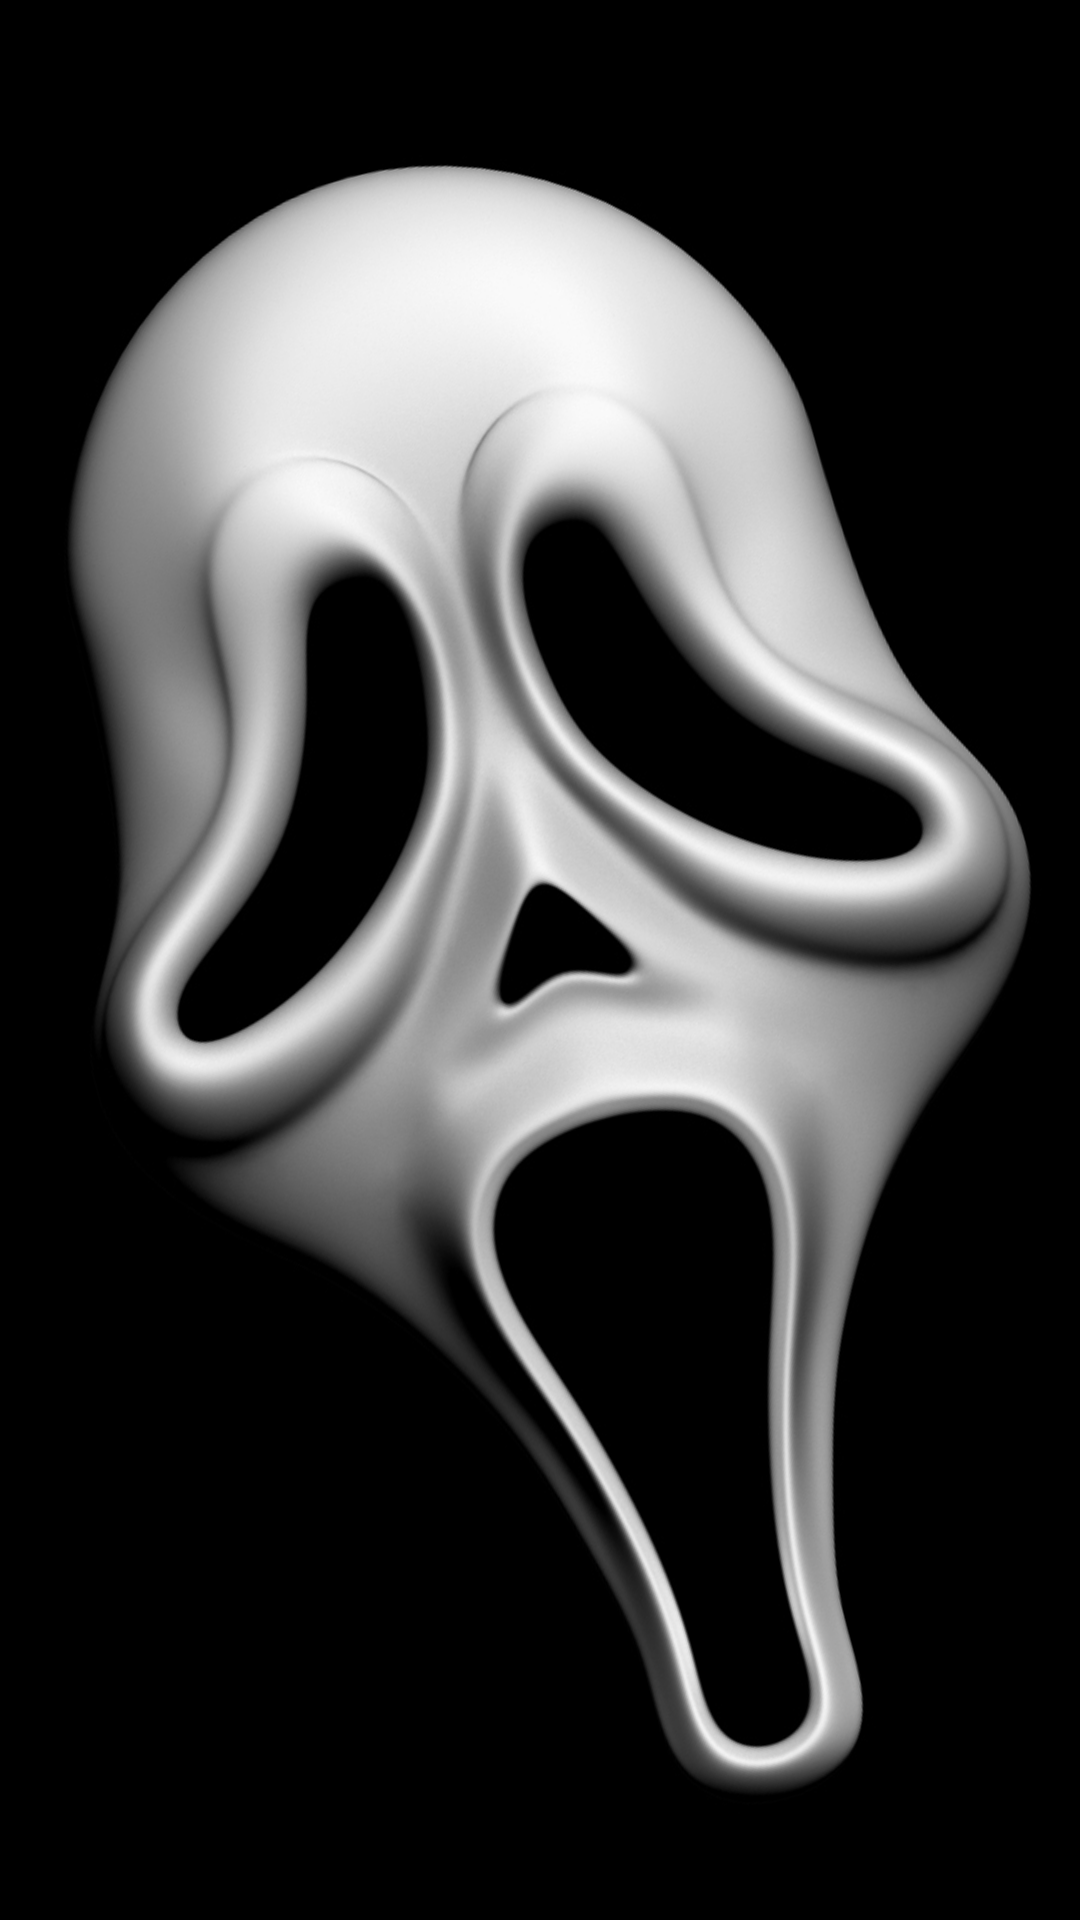 Ghost face wallpaper by nooneimportant  Download on ZEDGE  dd1d